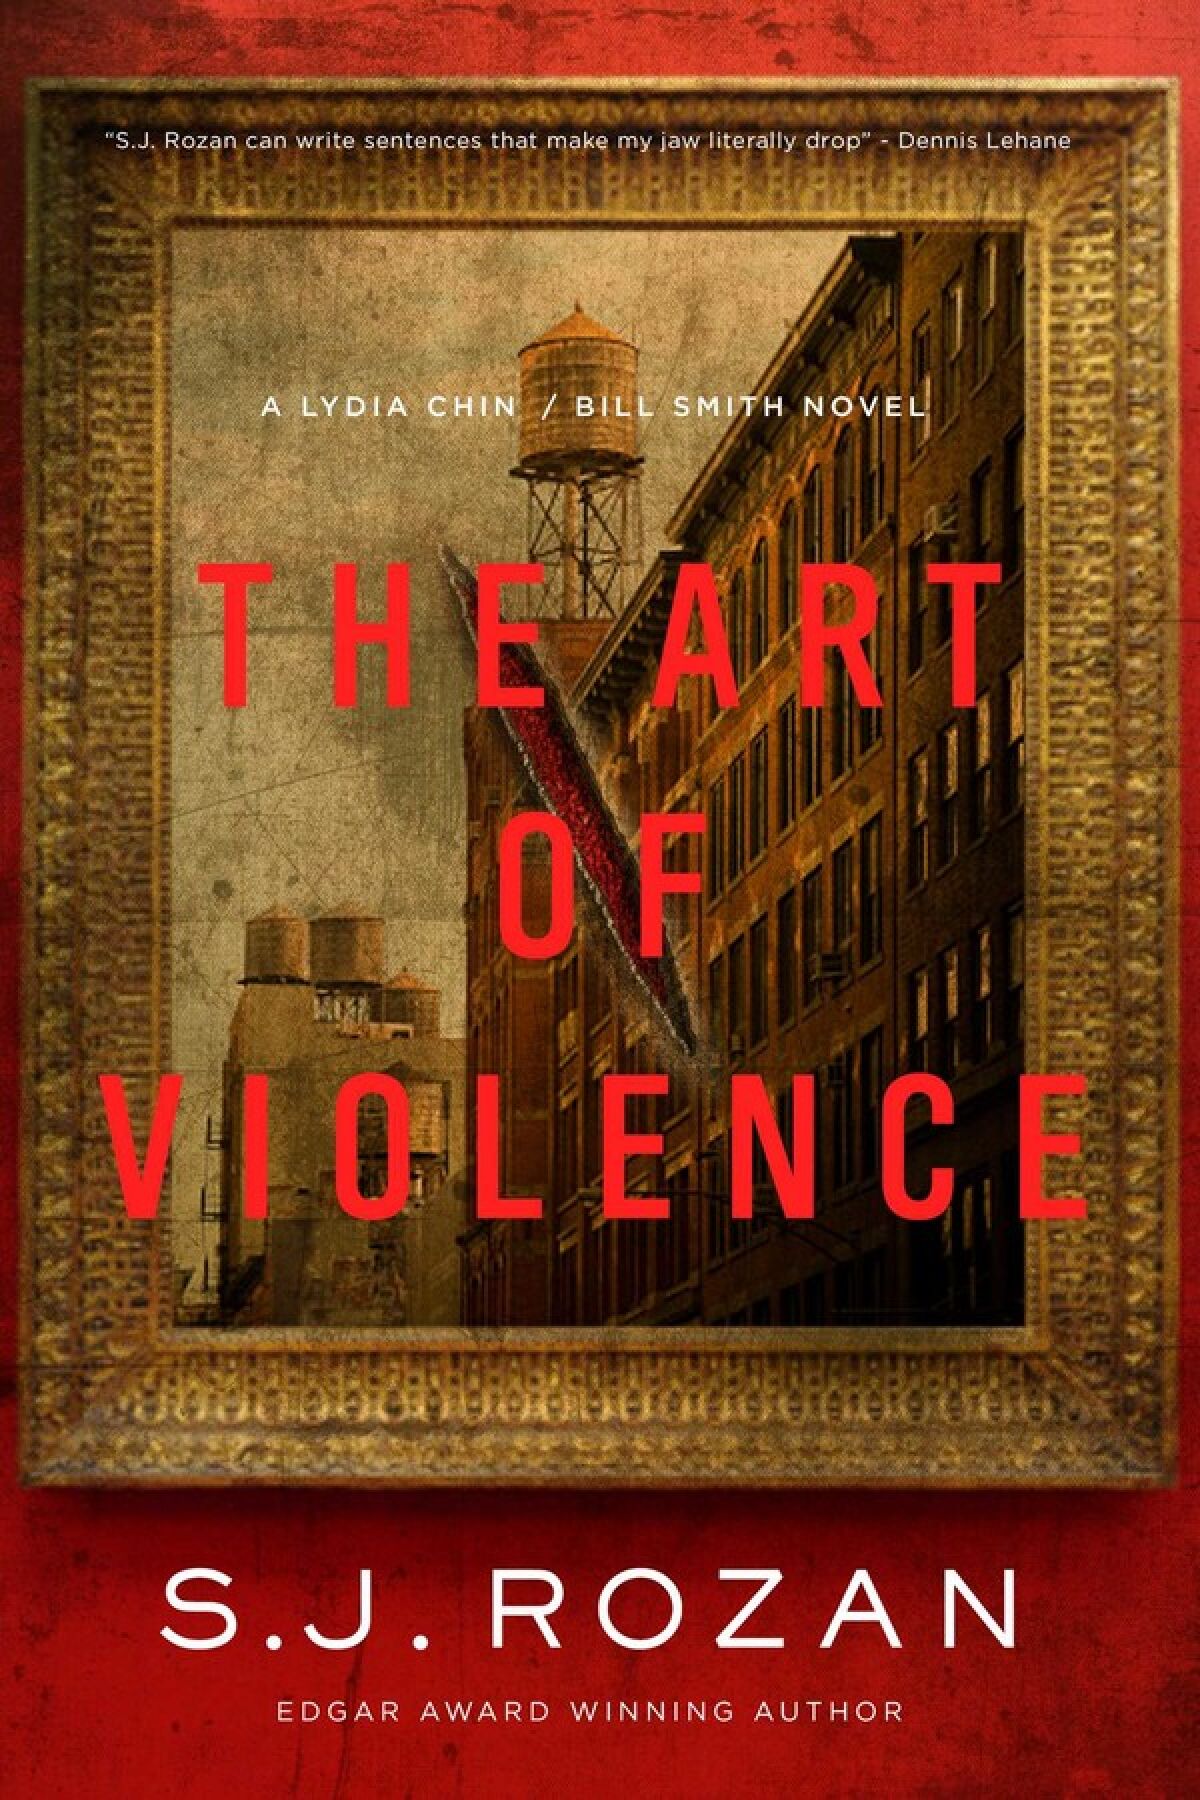 Book jacket for "The Art of Violence" by S.J. Rozan